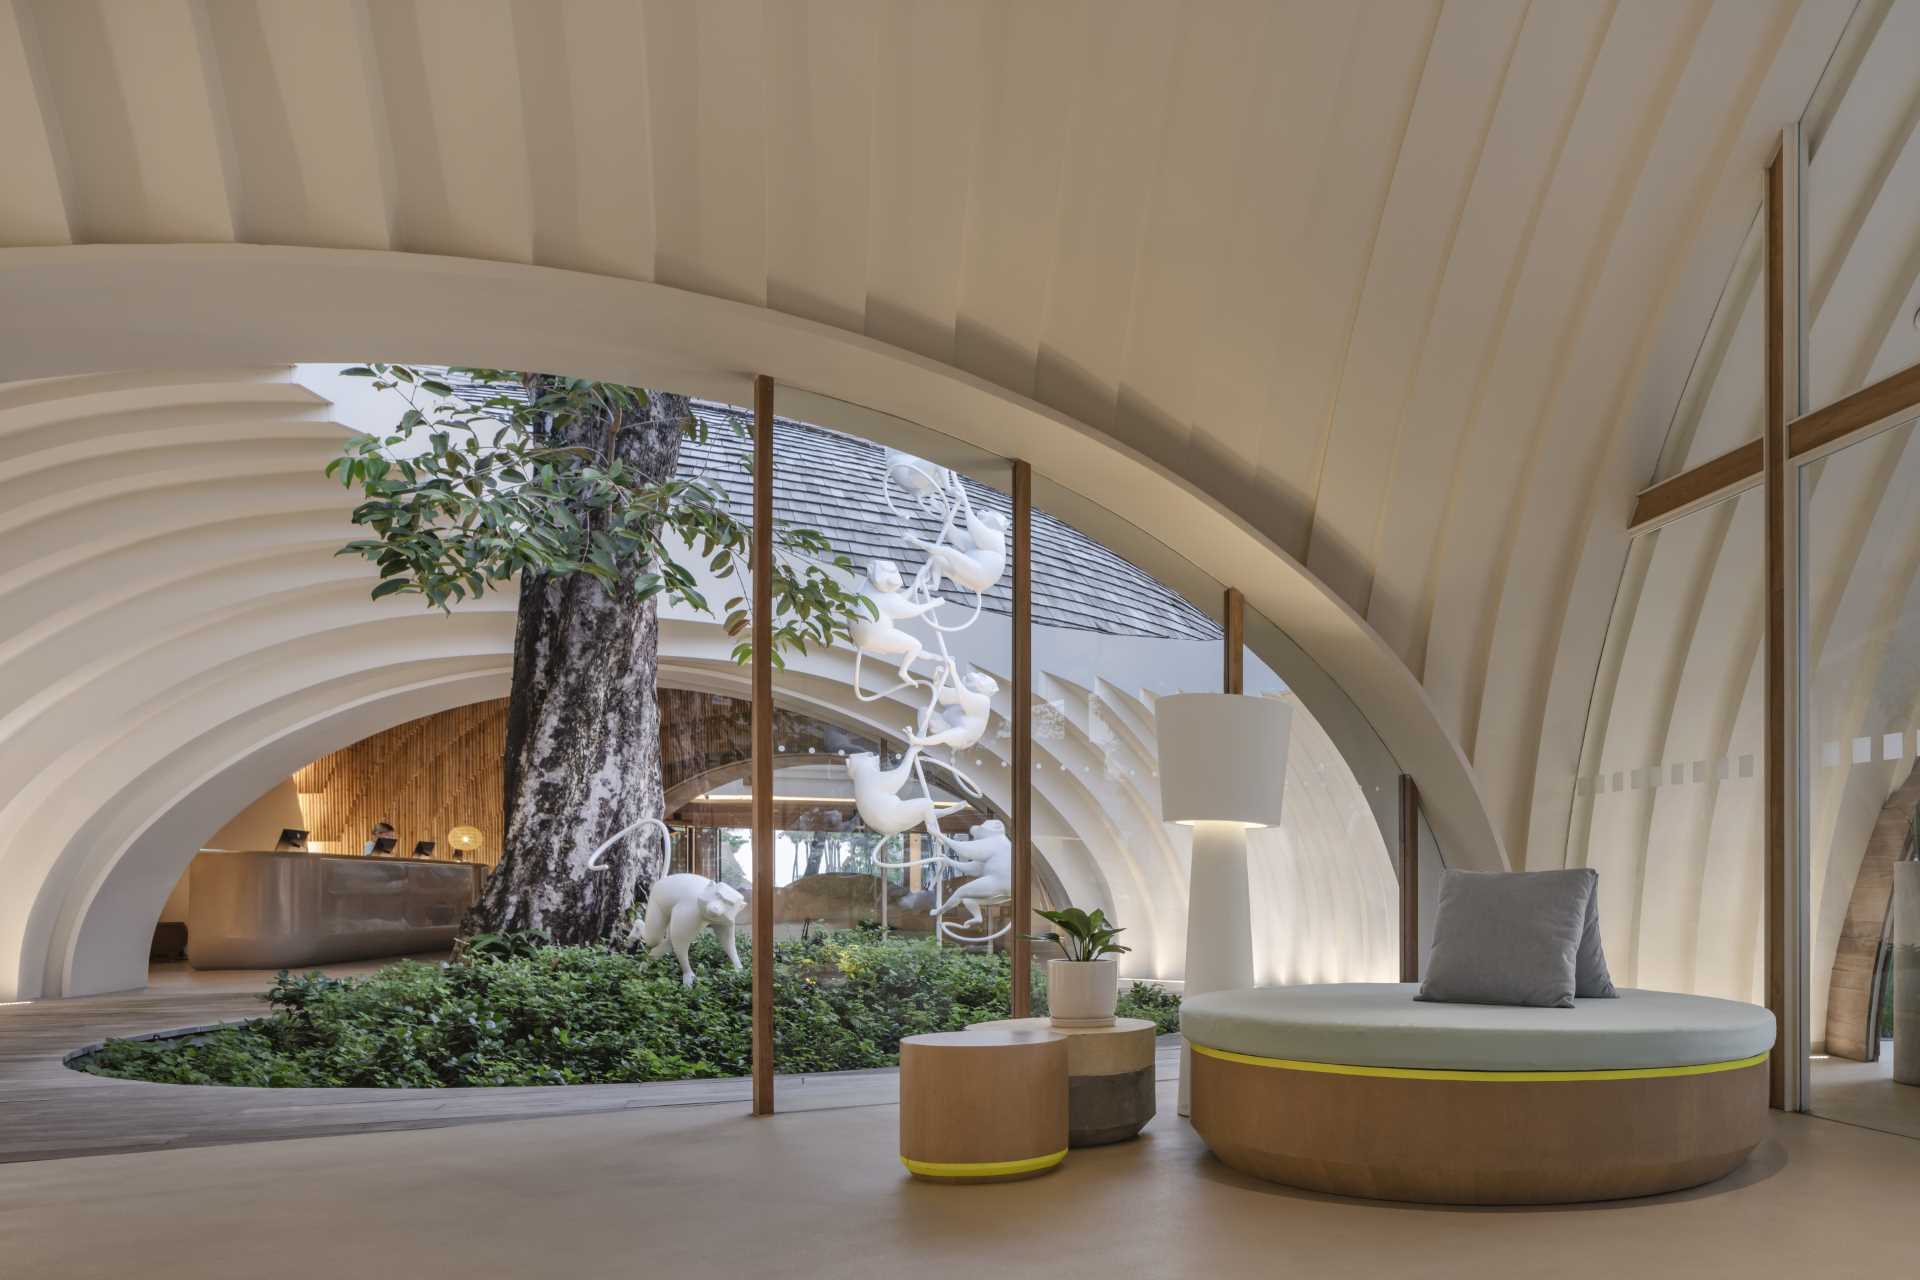 A modern hotel lobby is designed around an existing Java Plum tree with an oculus framing the sky.